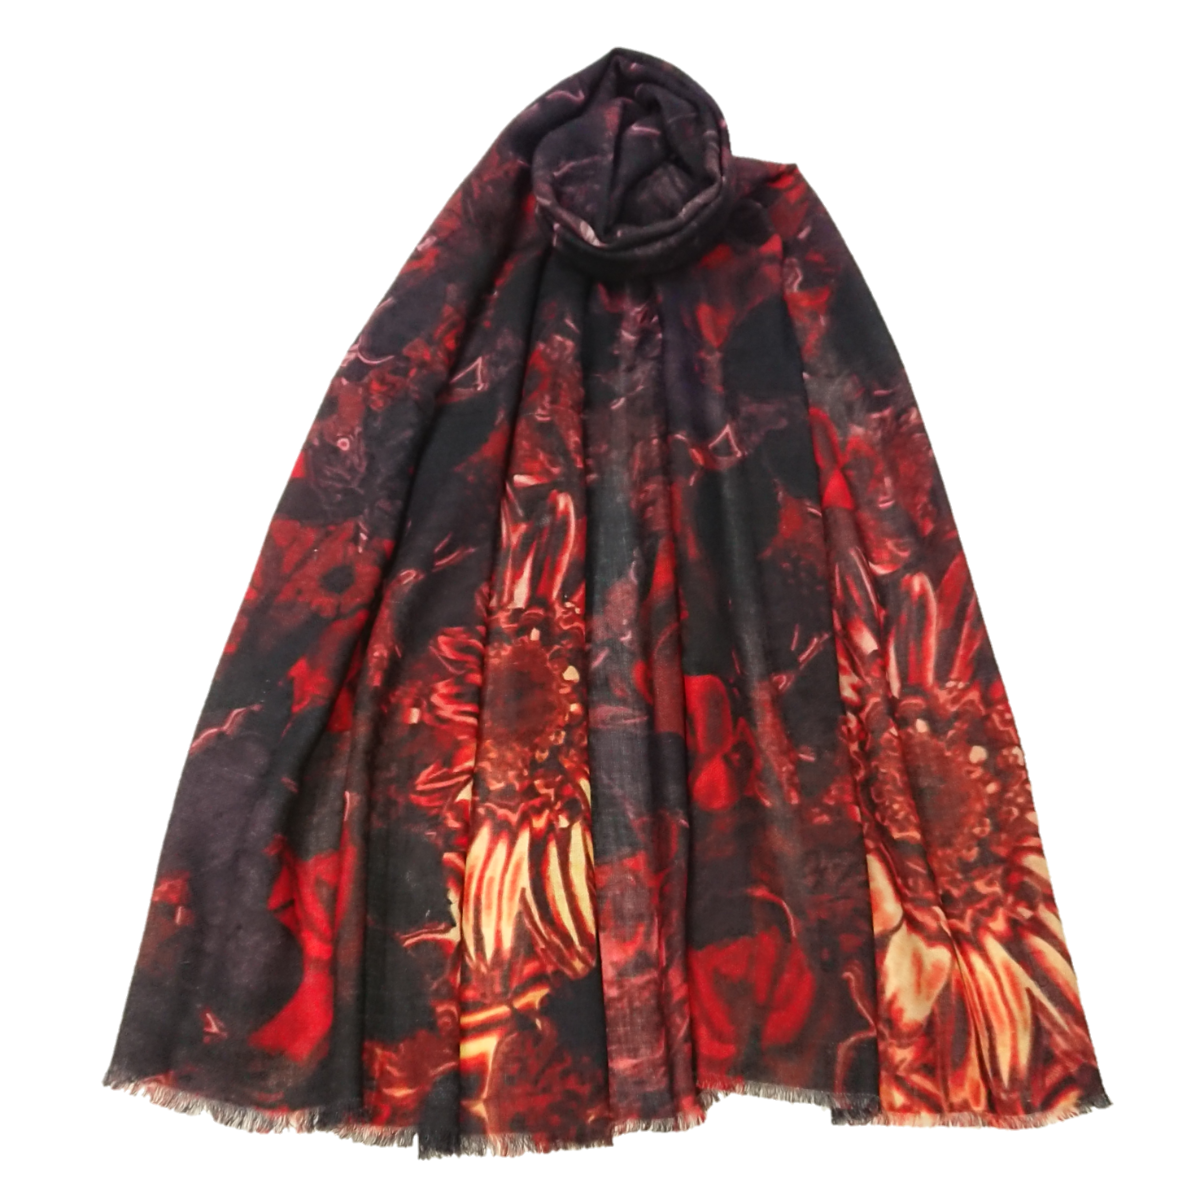 Ltd Edition 100% Pure Pashmina Cashmere Stole - Large Scarf - Black With Red Flowers Print